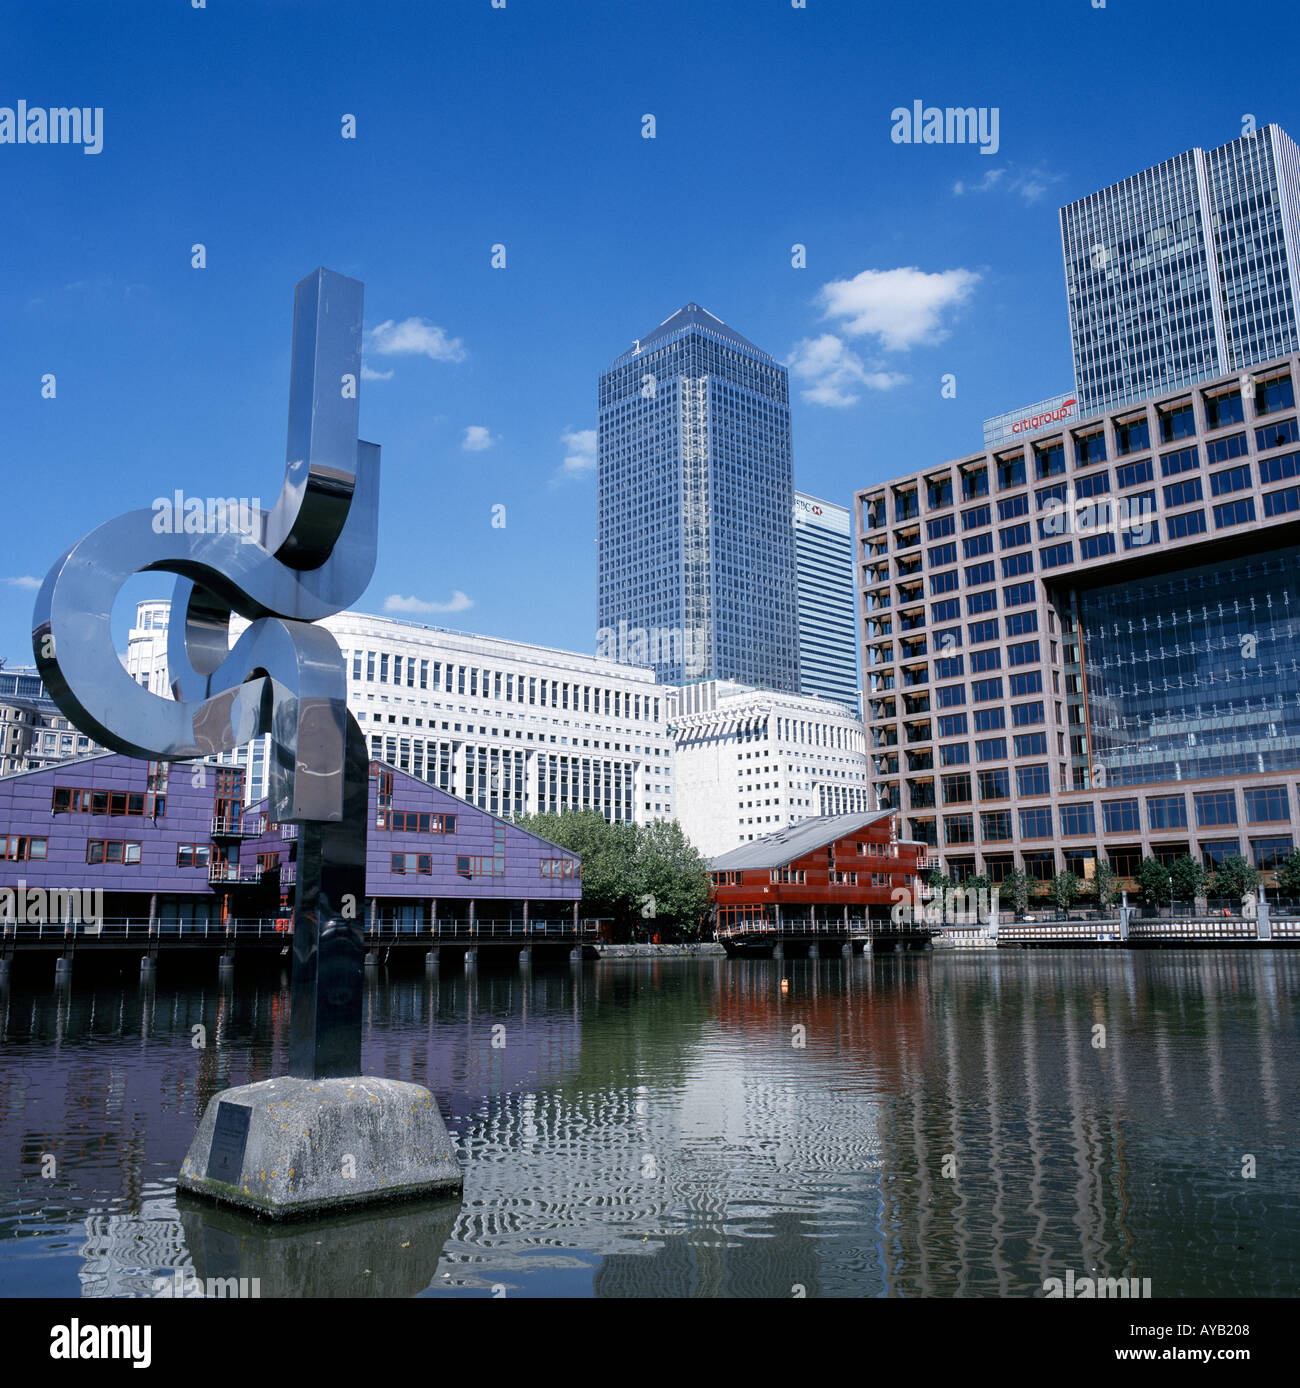 Canary Wharf in London Docklands Foto Stock